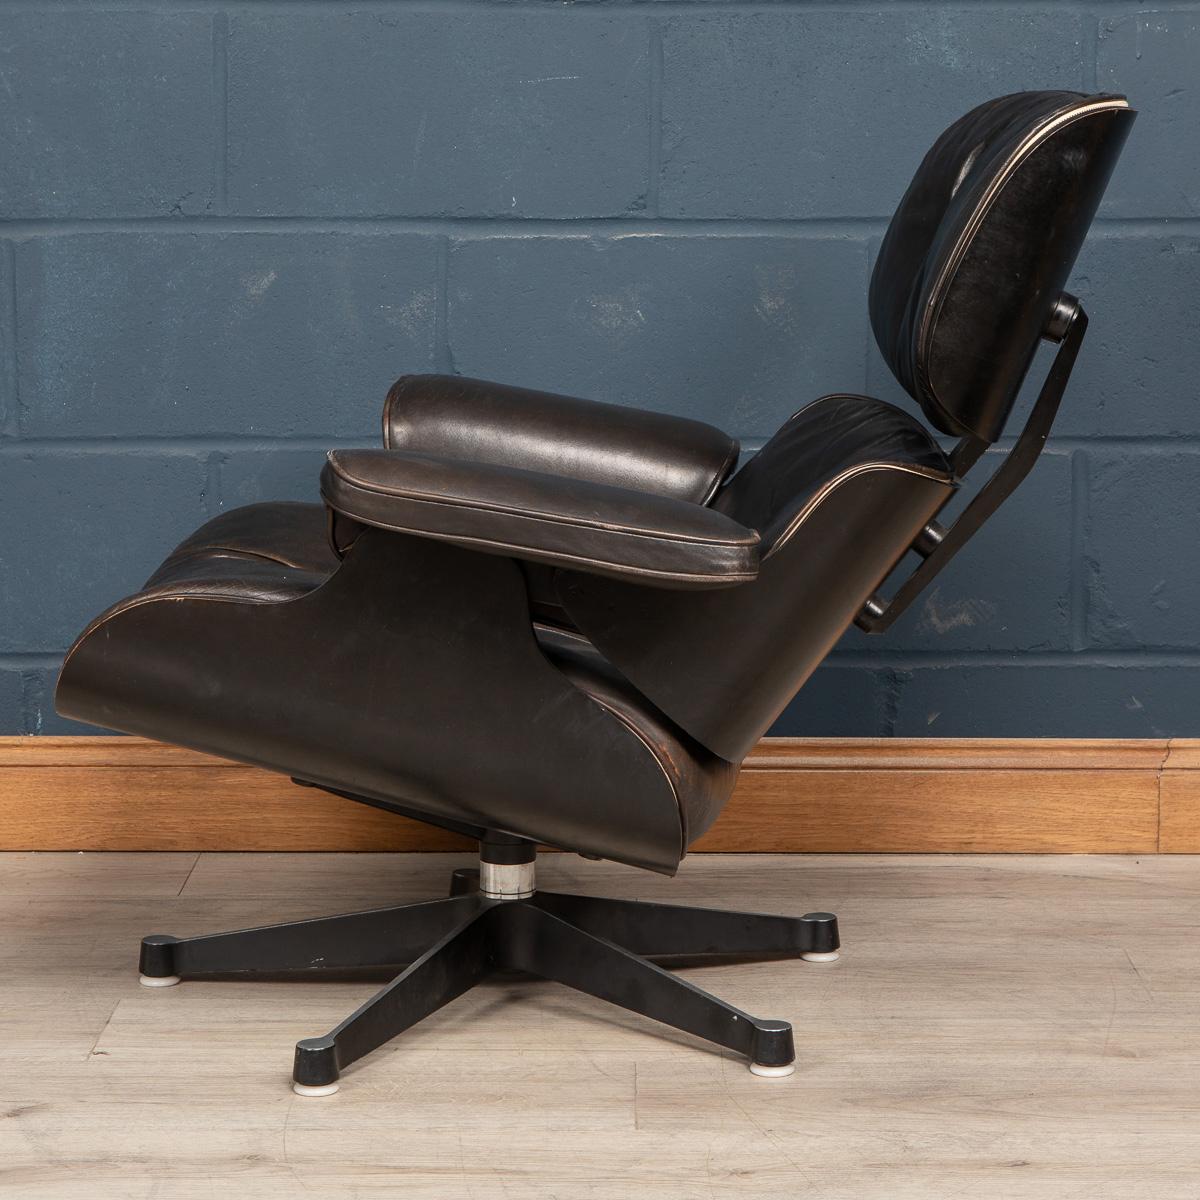 British 20th Century Black Eames Leather Lounge Chair & Ottoman by Vitra, c.1980